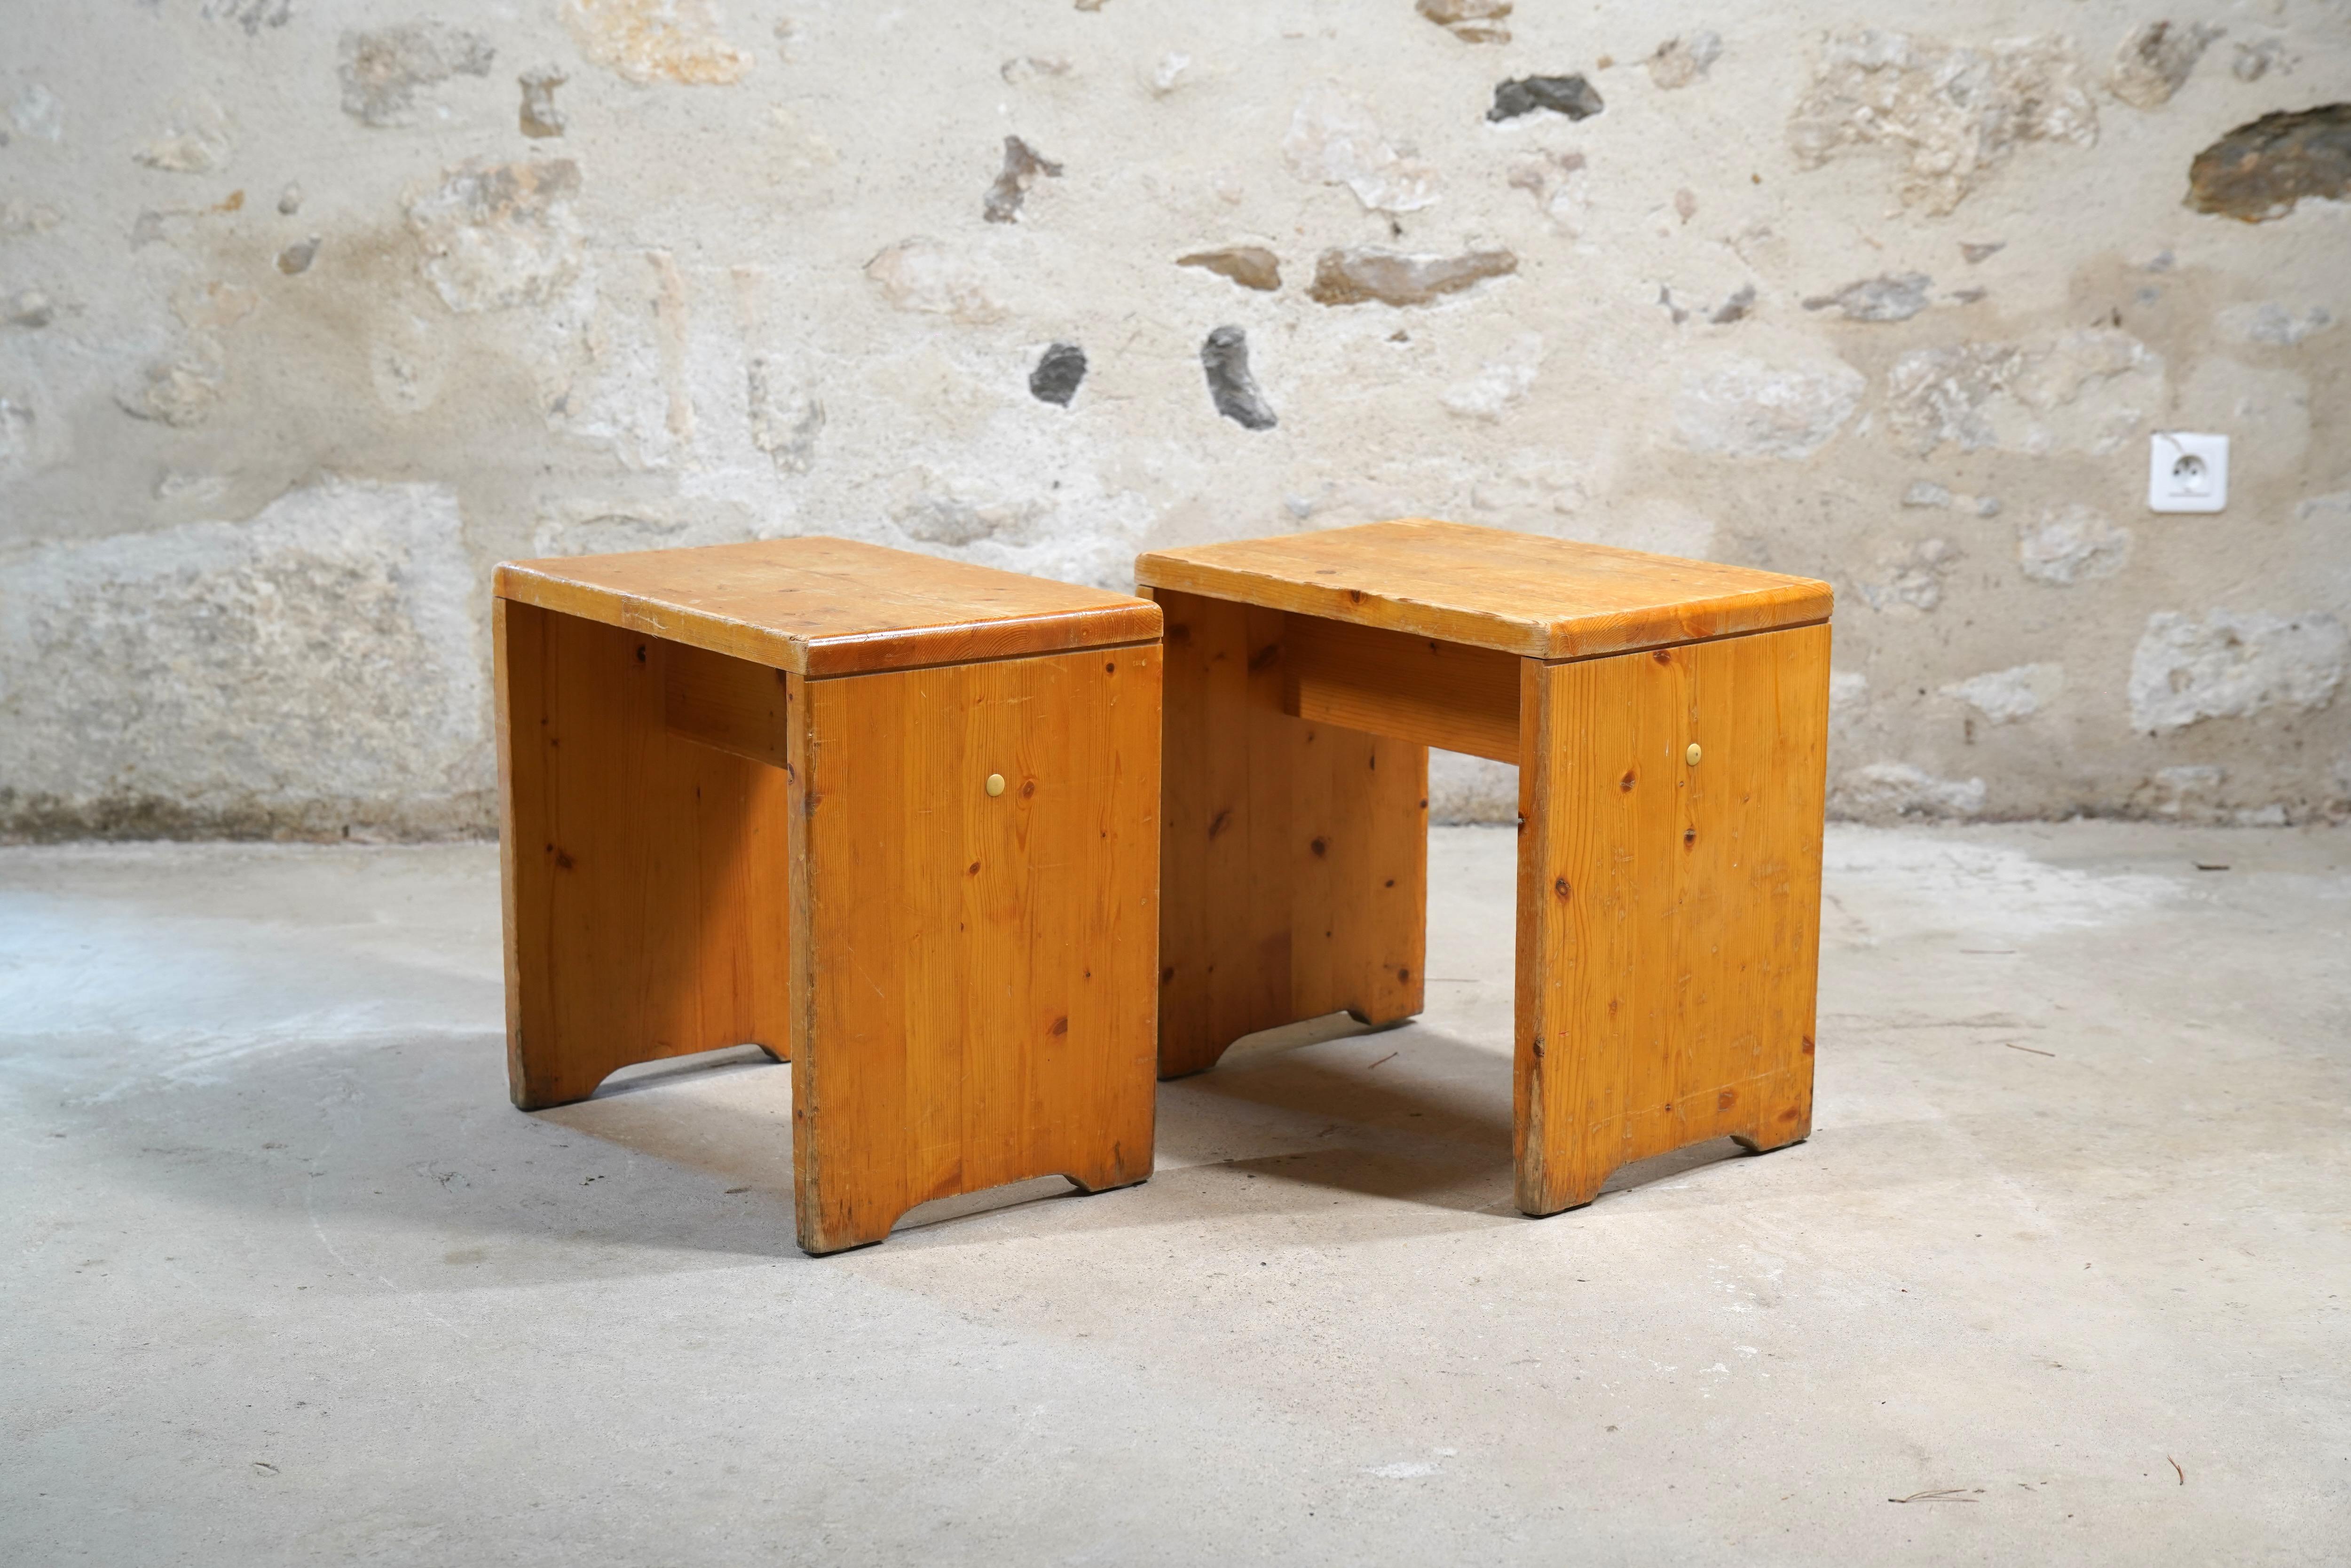 Wonderful stool/side table designed by acclaimed architect and designer Charlotte Perriand for the ski resort Les Arcs from 1967 to 1989 (arcs 1600 and 1800). 

These stools are at the crossroads of the traditional Savoyard style and the functional